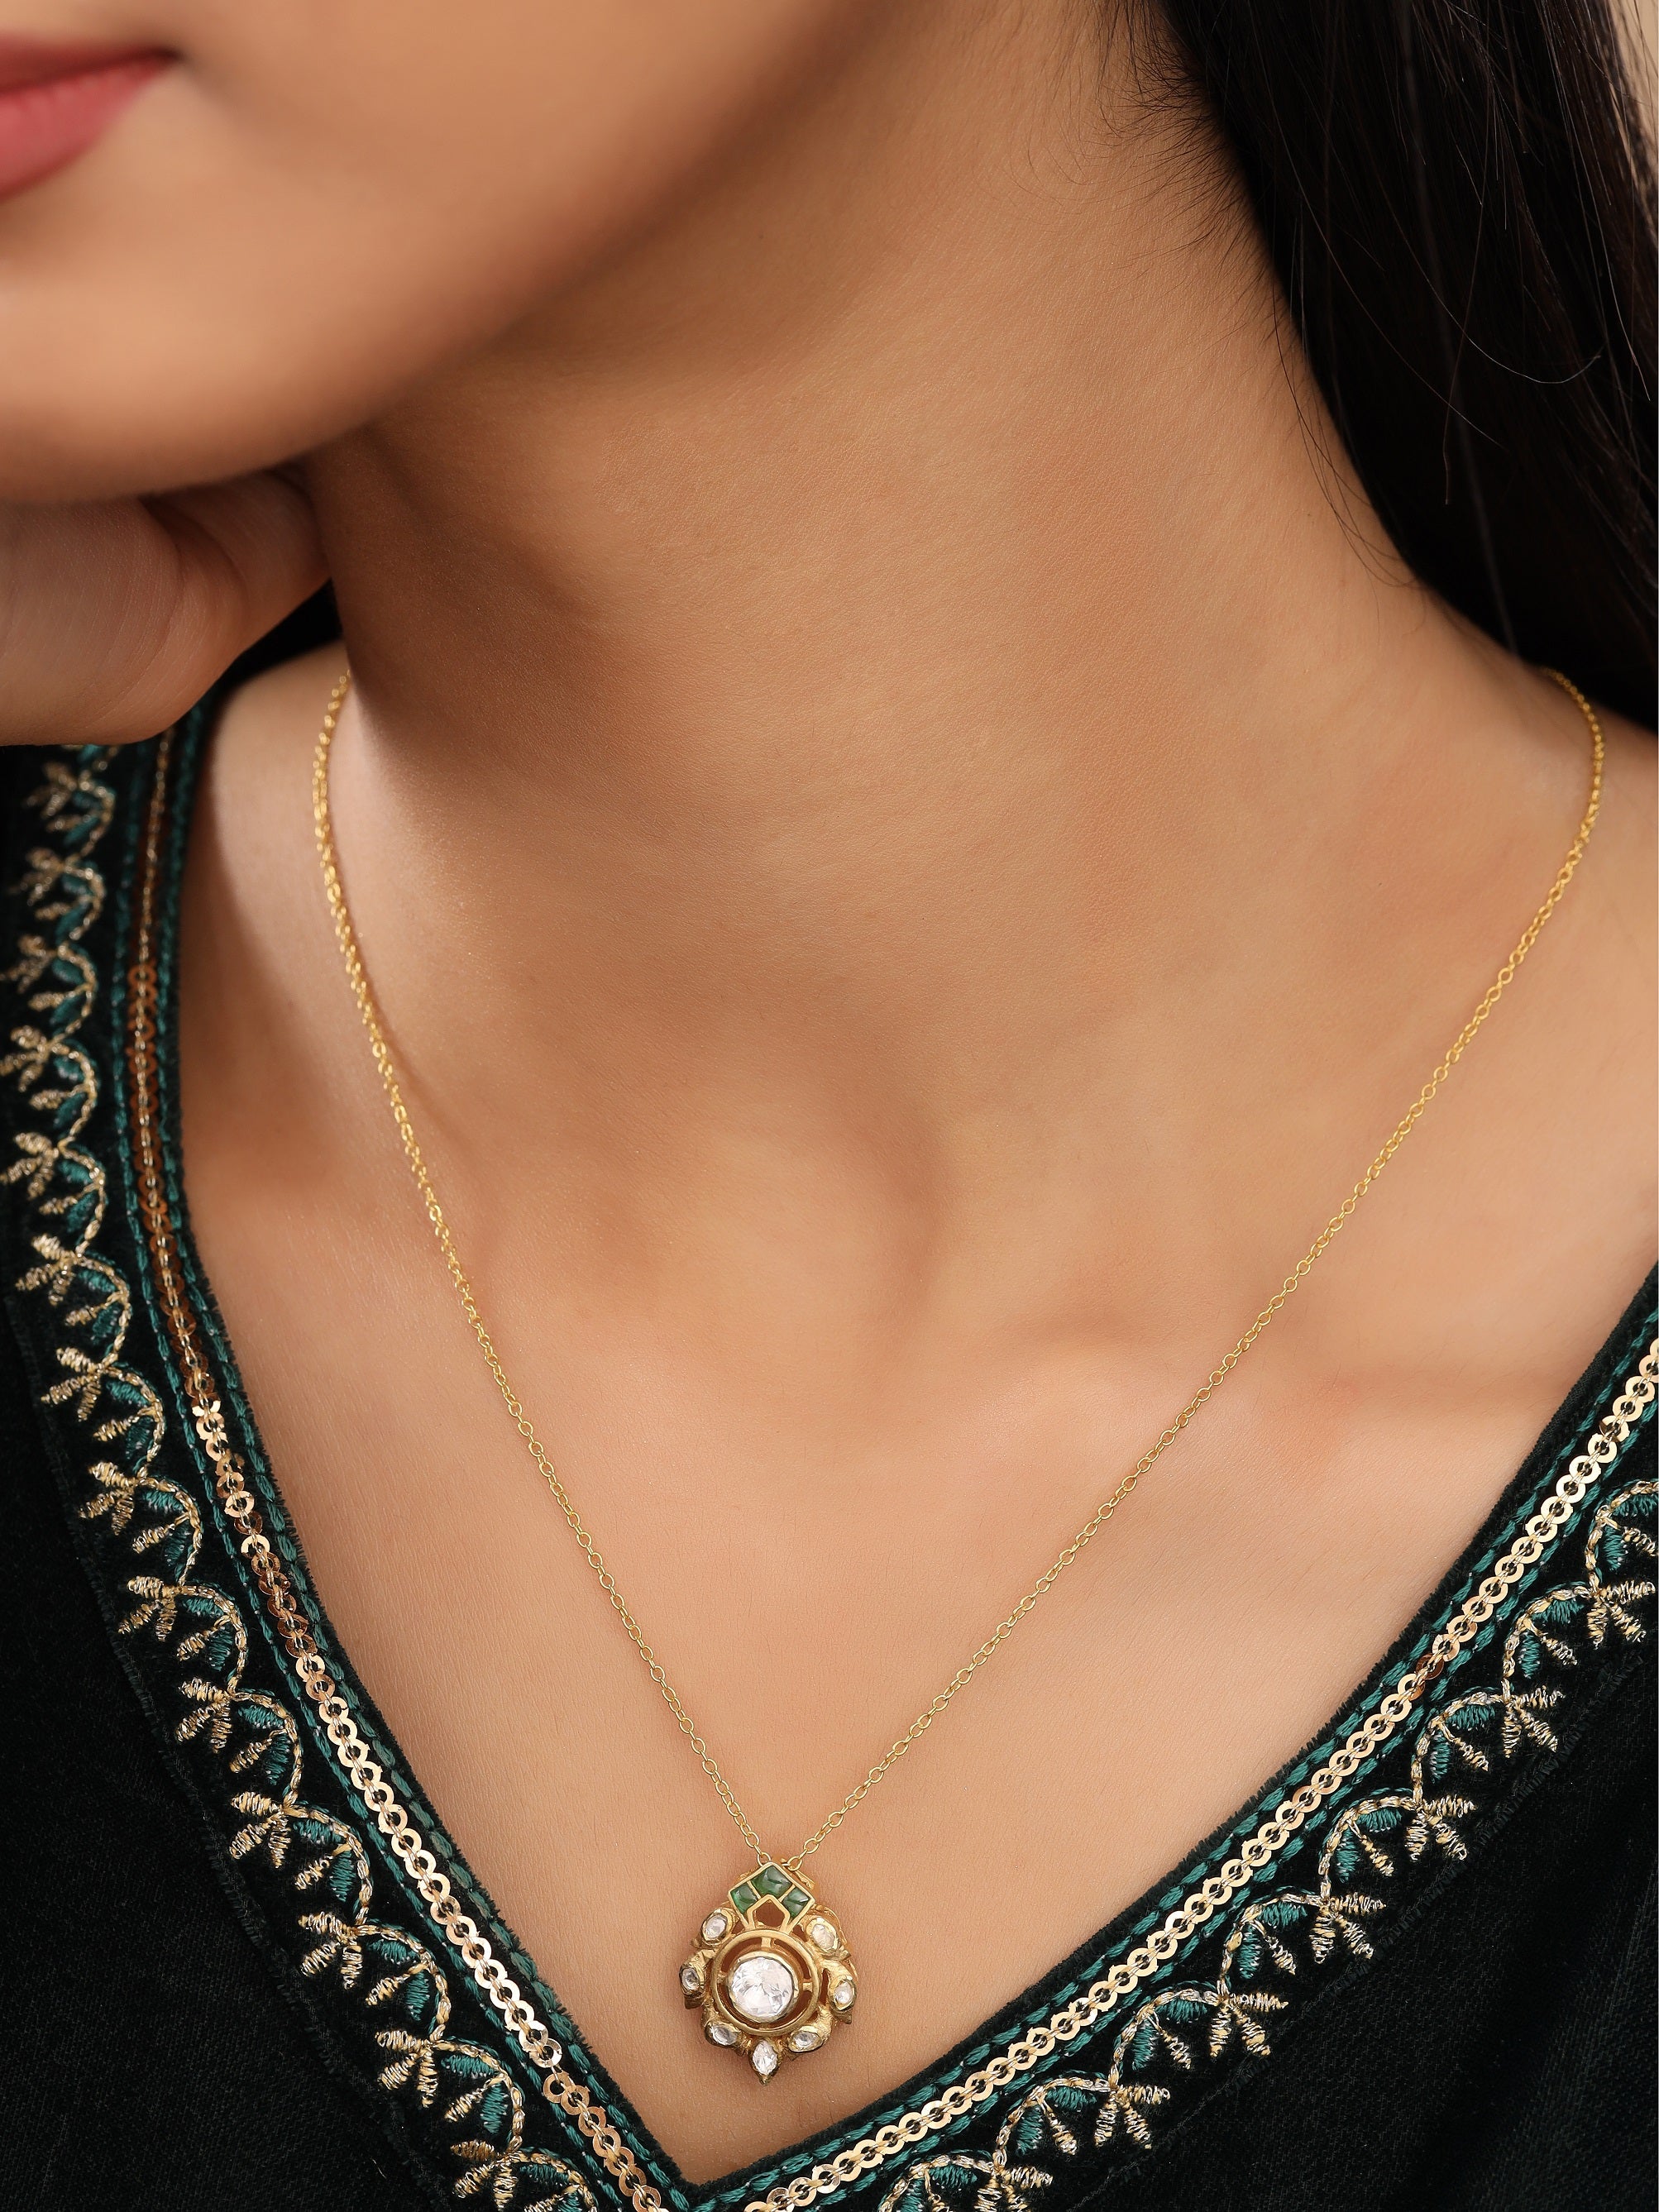 Traditional Motif Inspired Gold-Plated Pendant